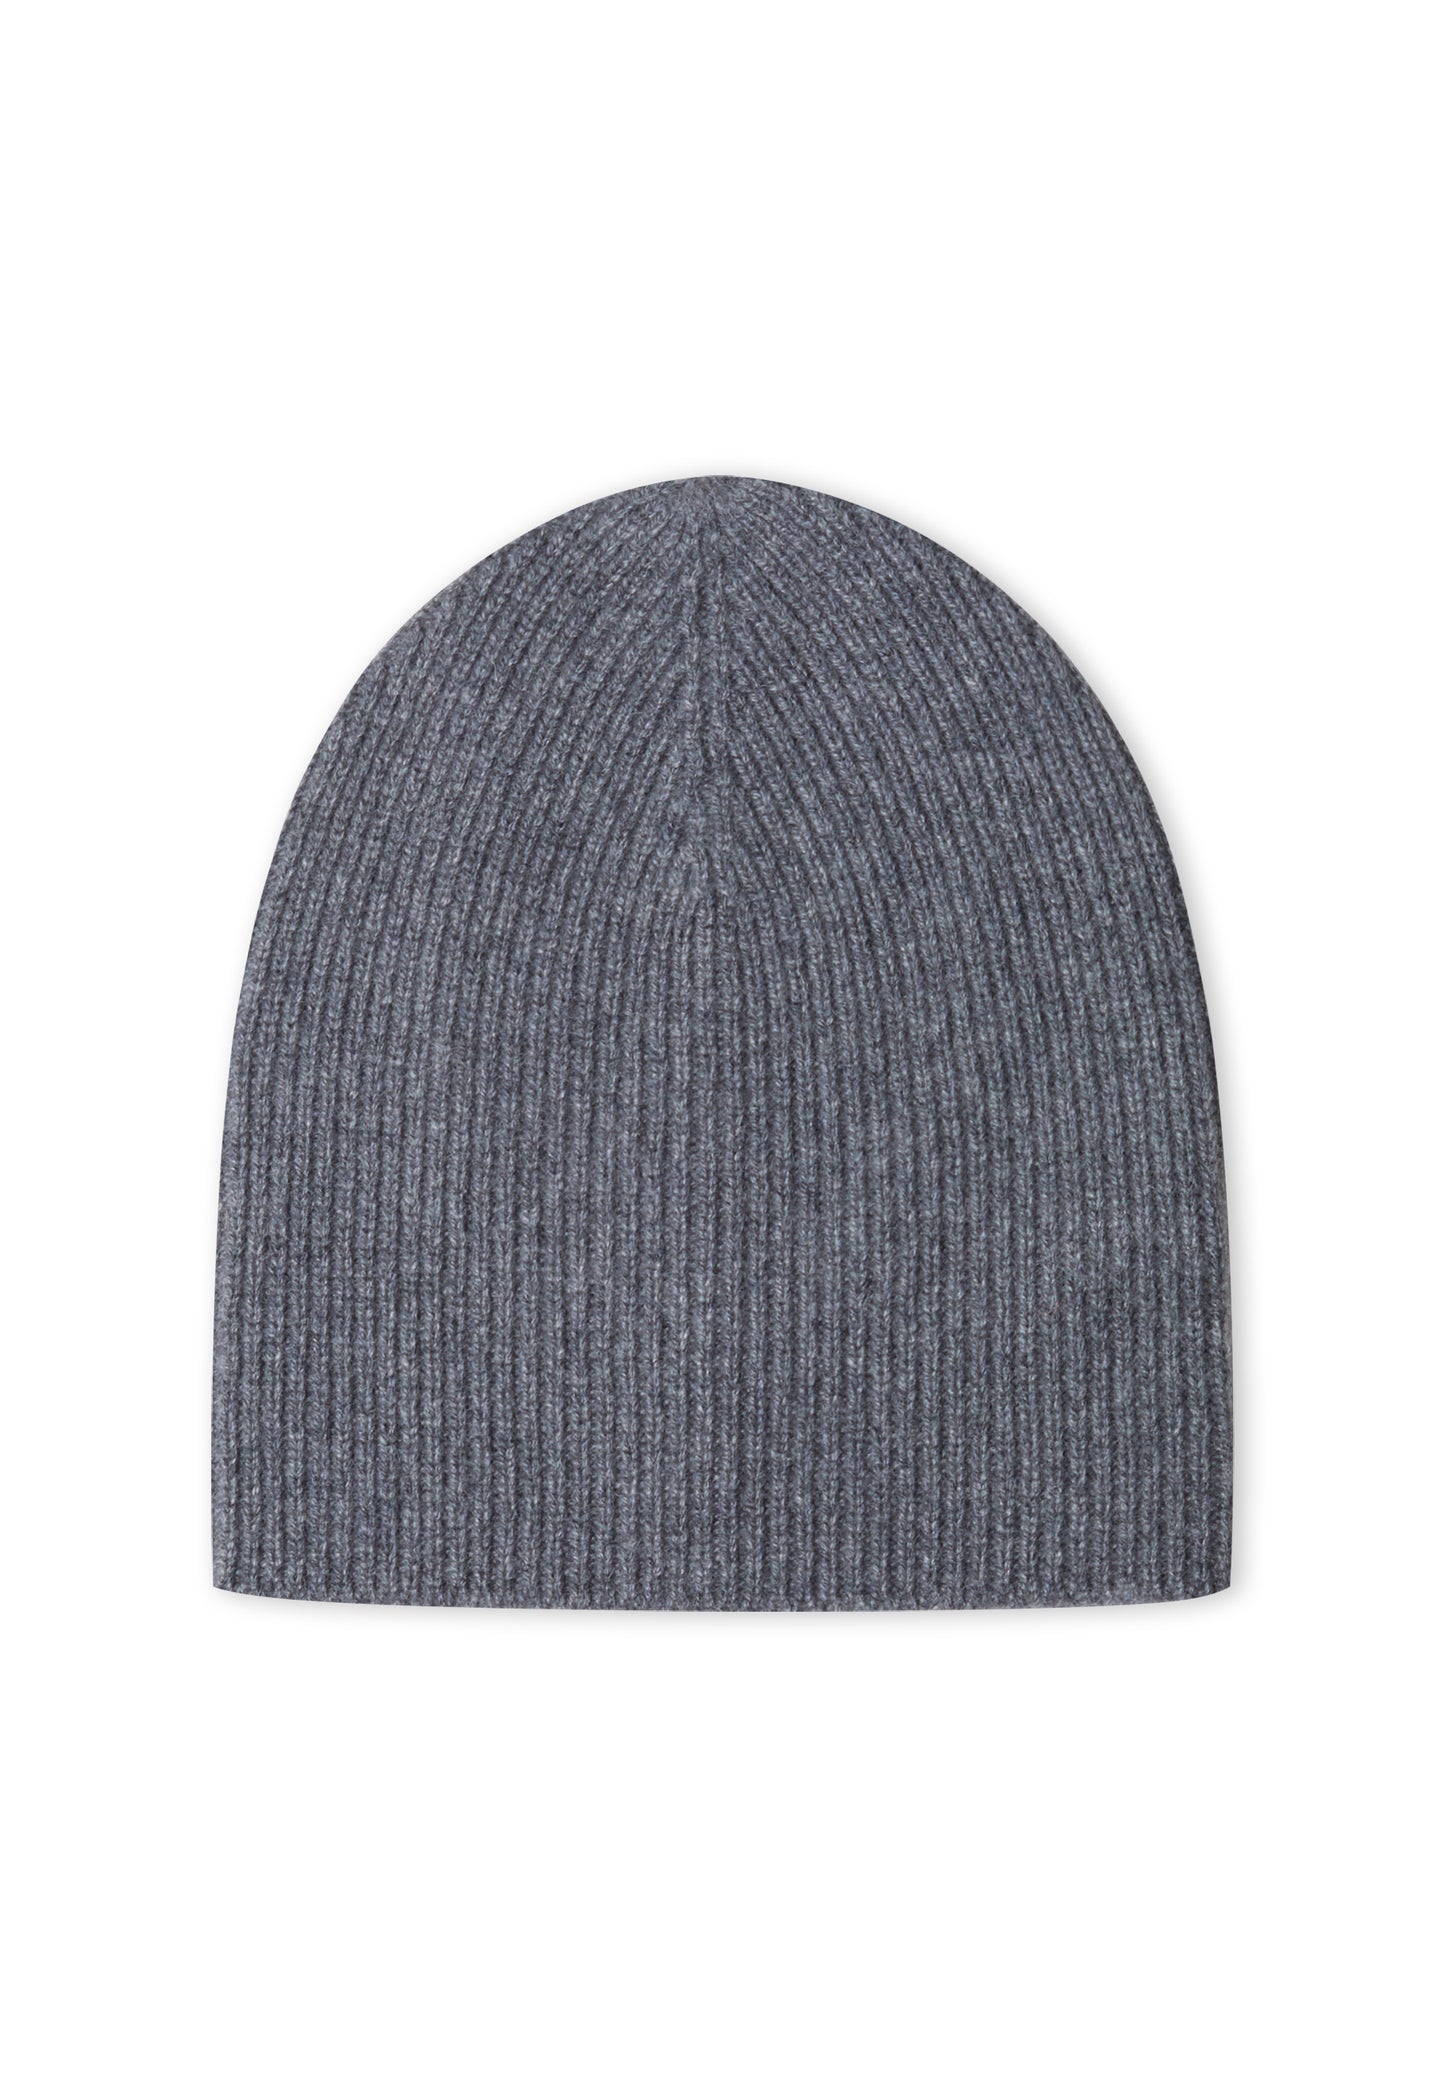 Style Republic Men’s Ribbed Beanie, 100% Cashmere, Soft & Stretchy, Warm Hat for Winter